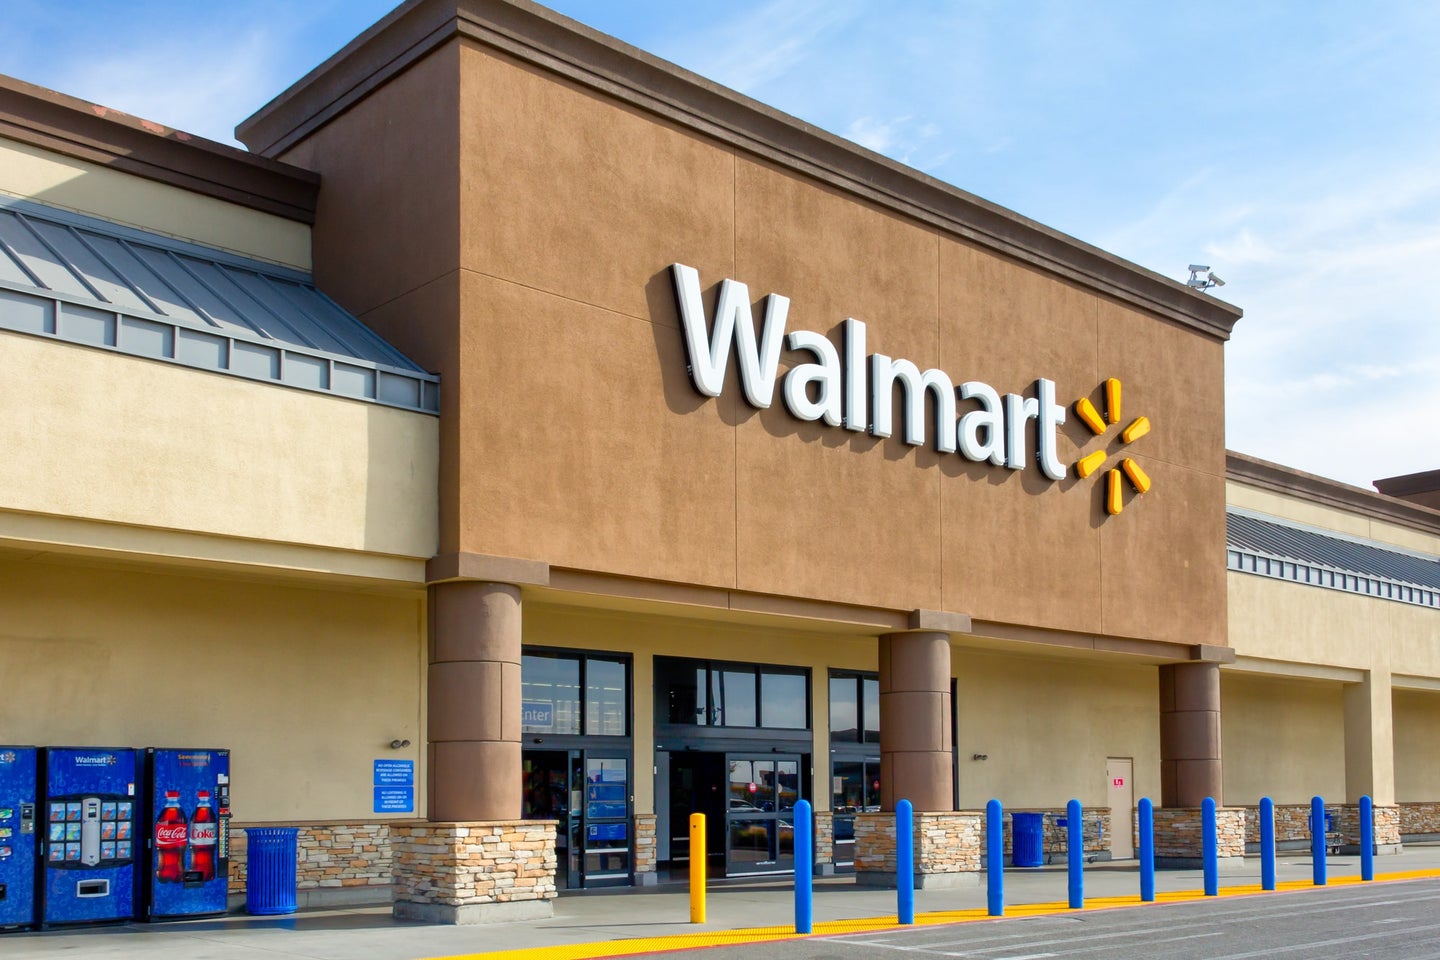 Shop Black Friday 2020 Deals Throughout November at Walmart&#8217;s Early Black Friday Sale